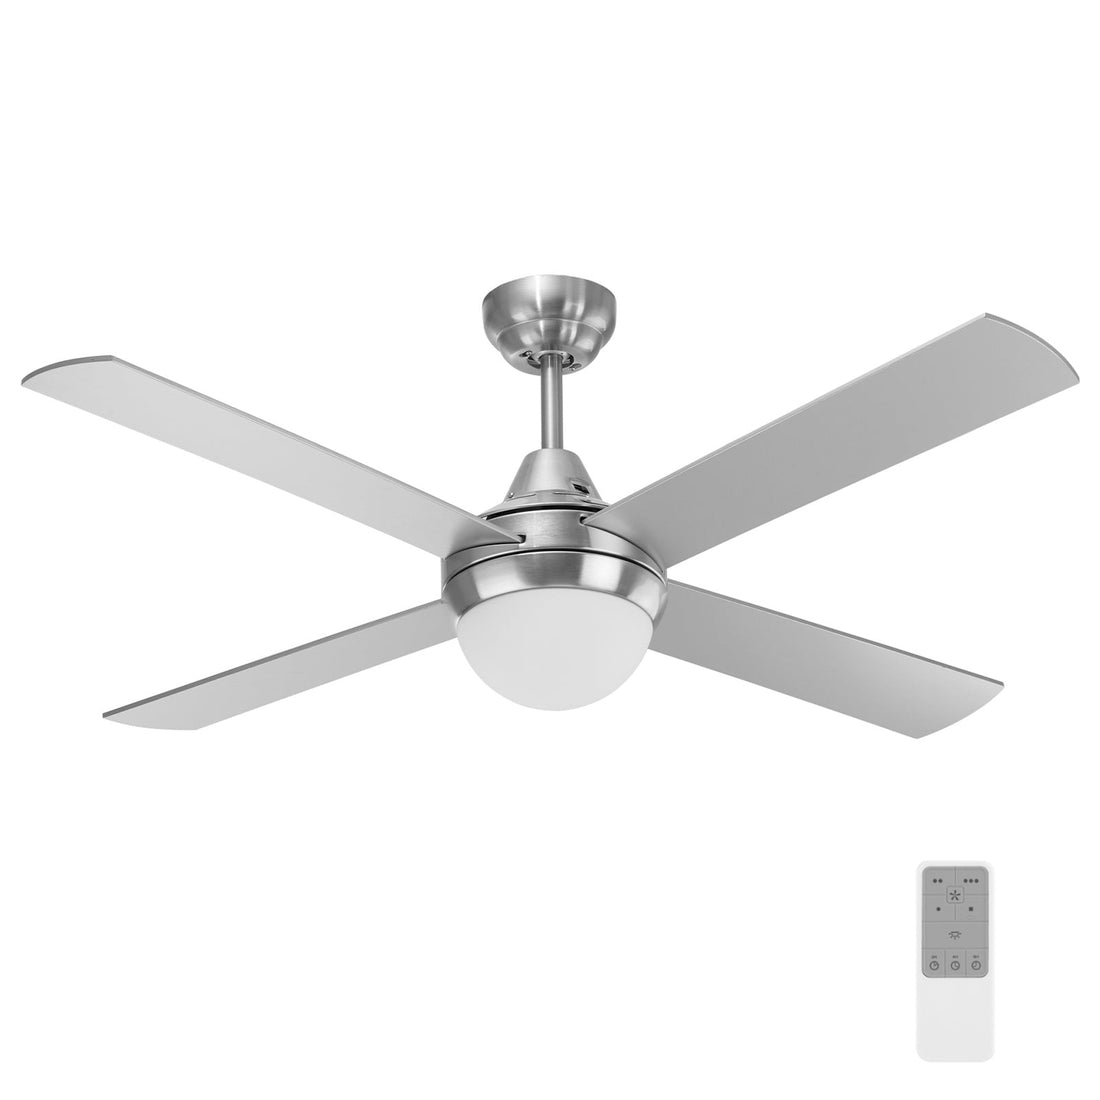 Lonsdale AC Ceiling Fan with LED Light and Remote Mercator